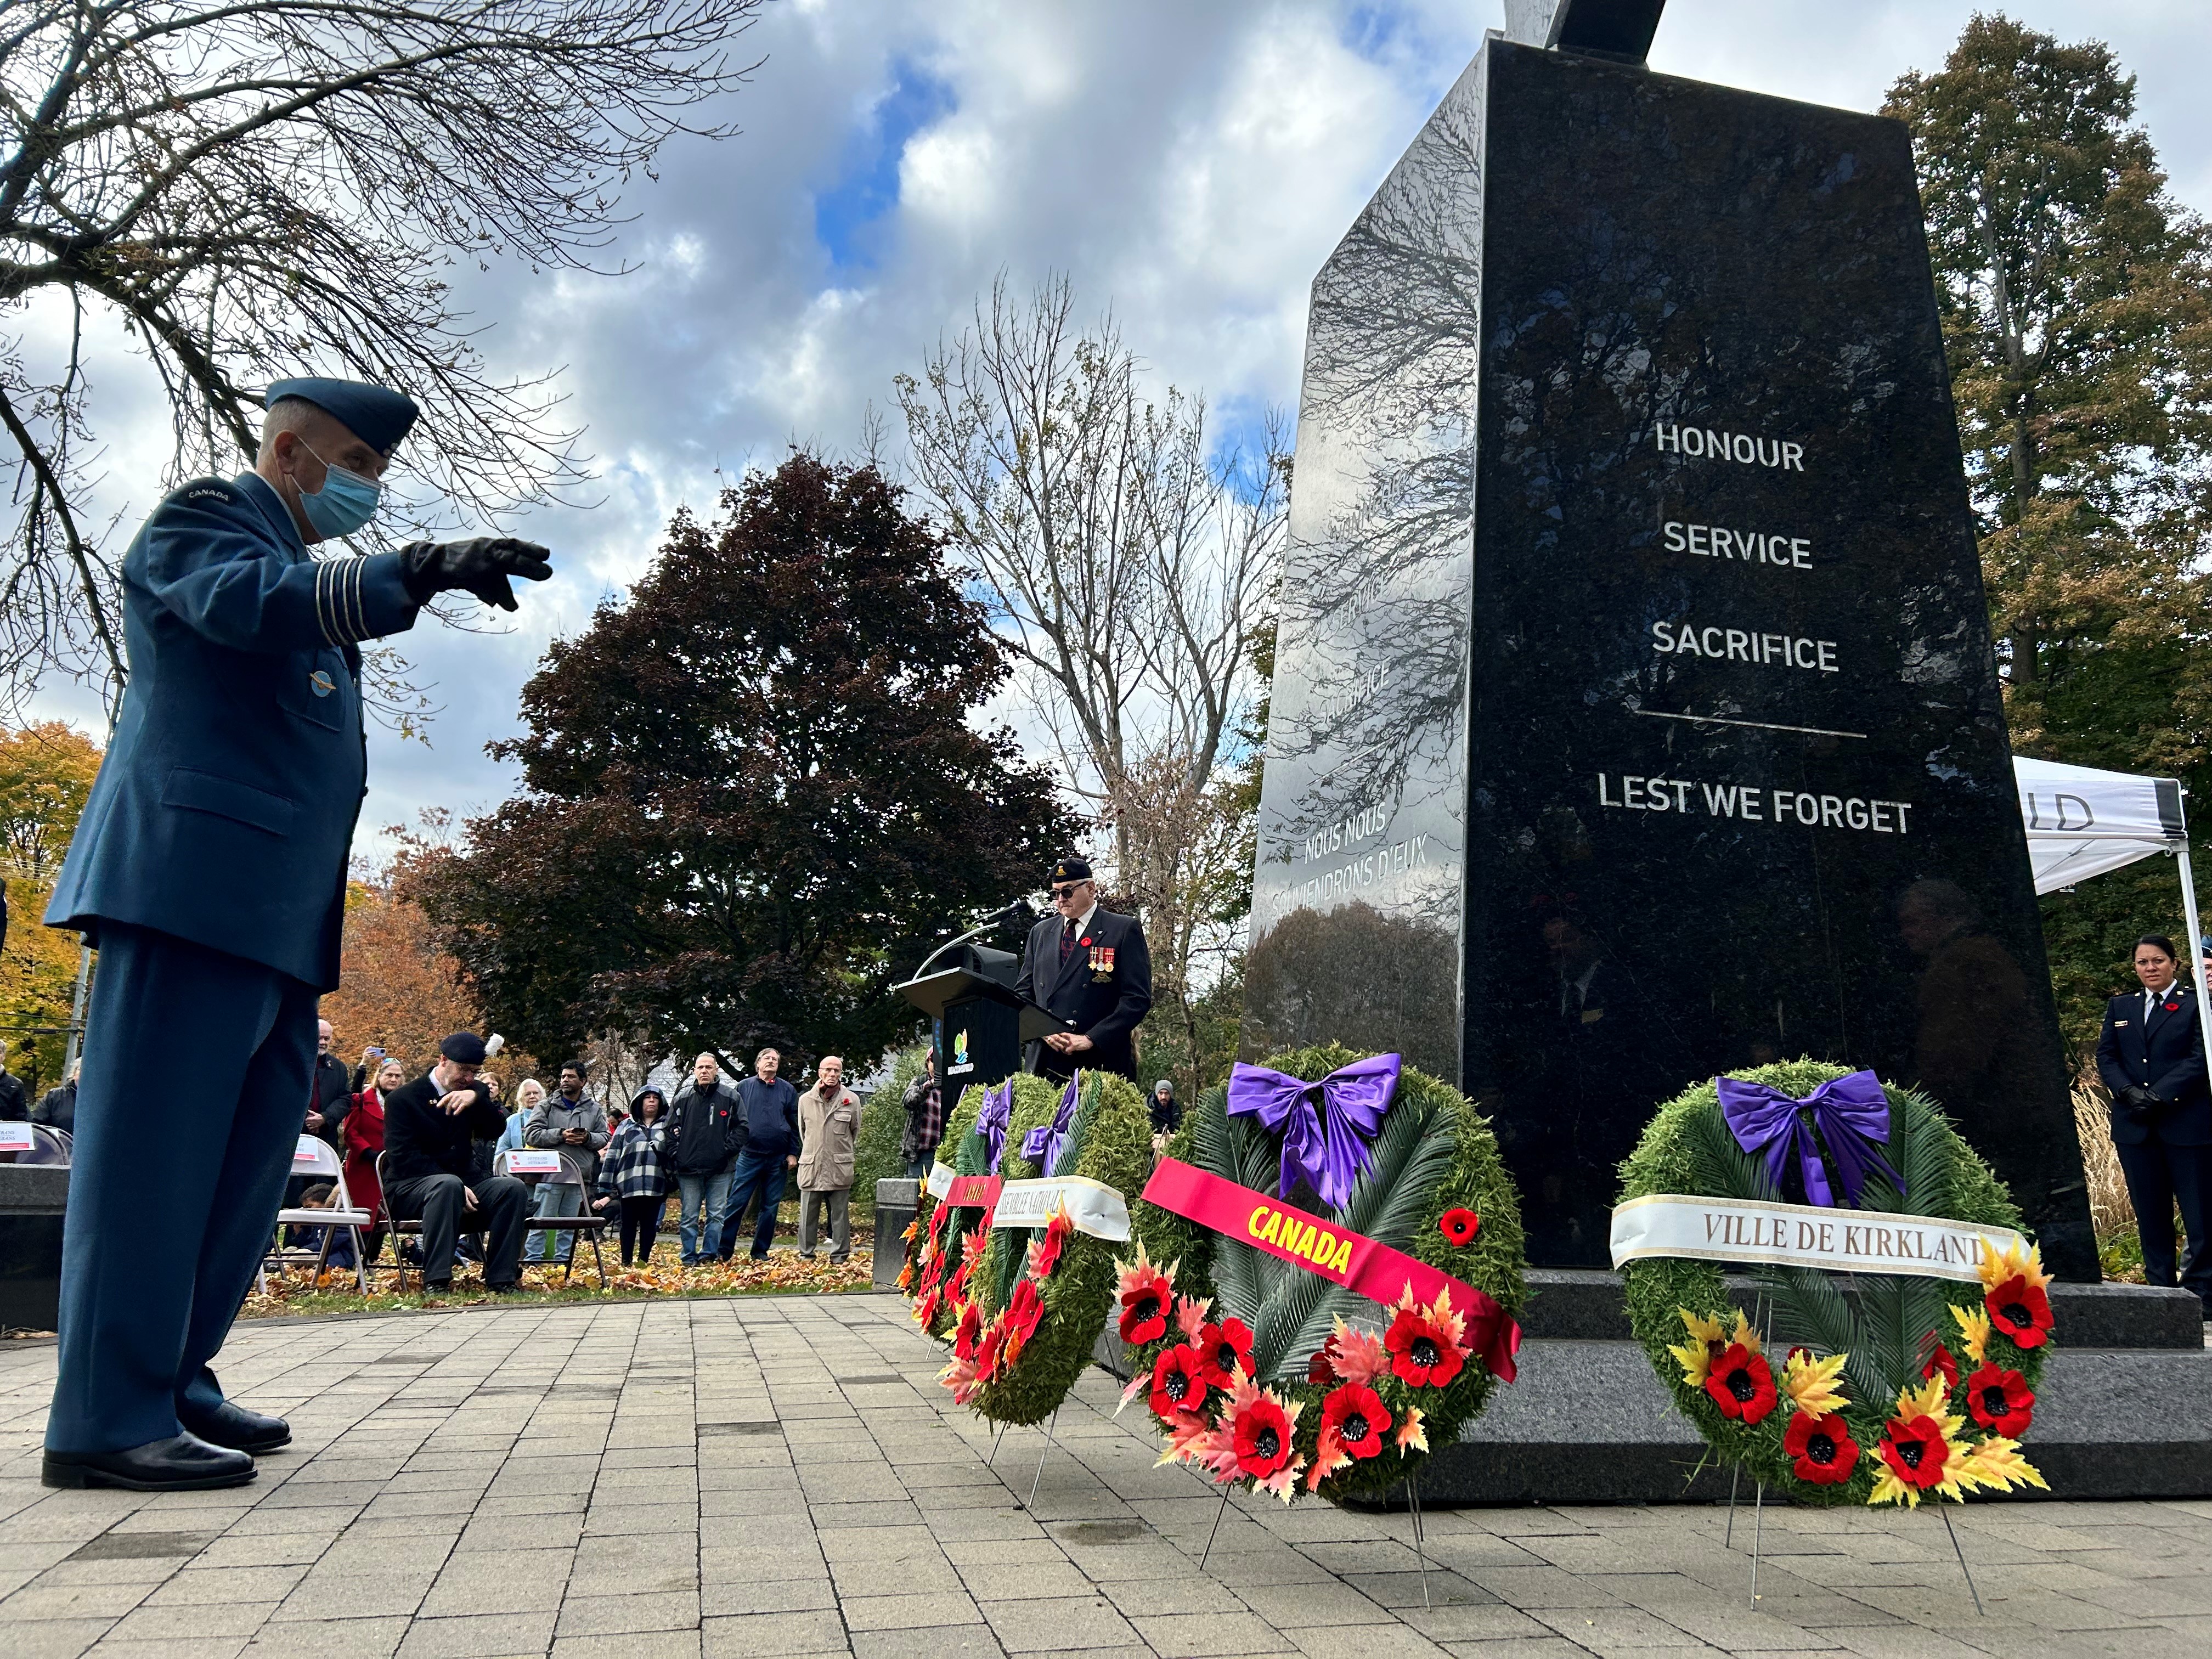 West Island Remembrance Day ceremony highlights peace, duty to remember